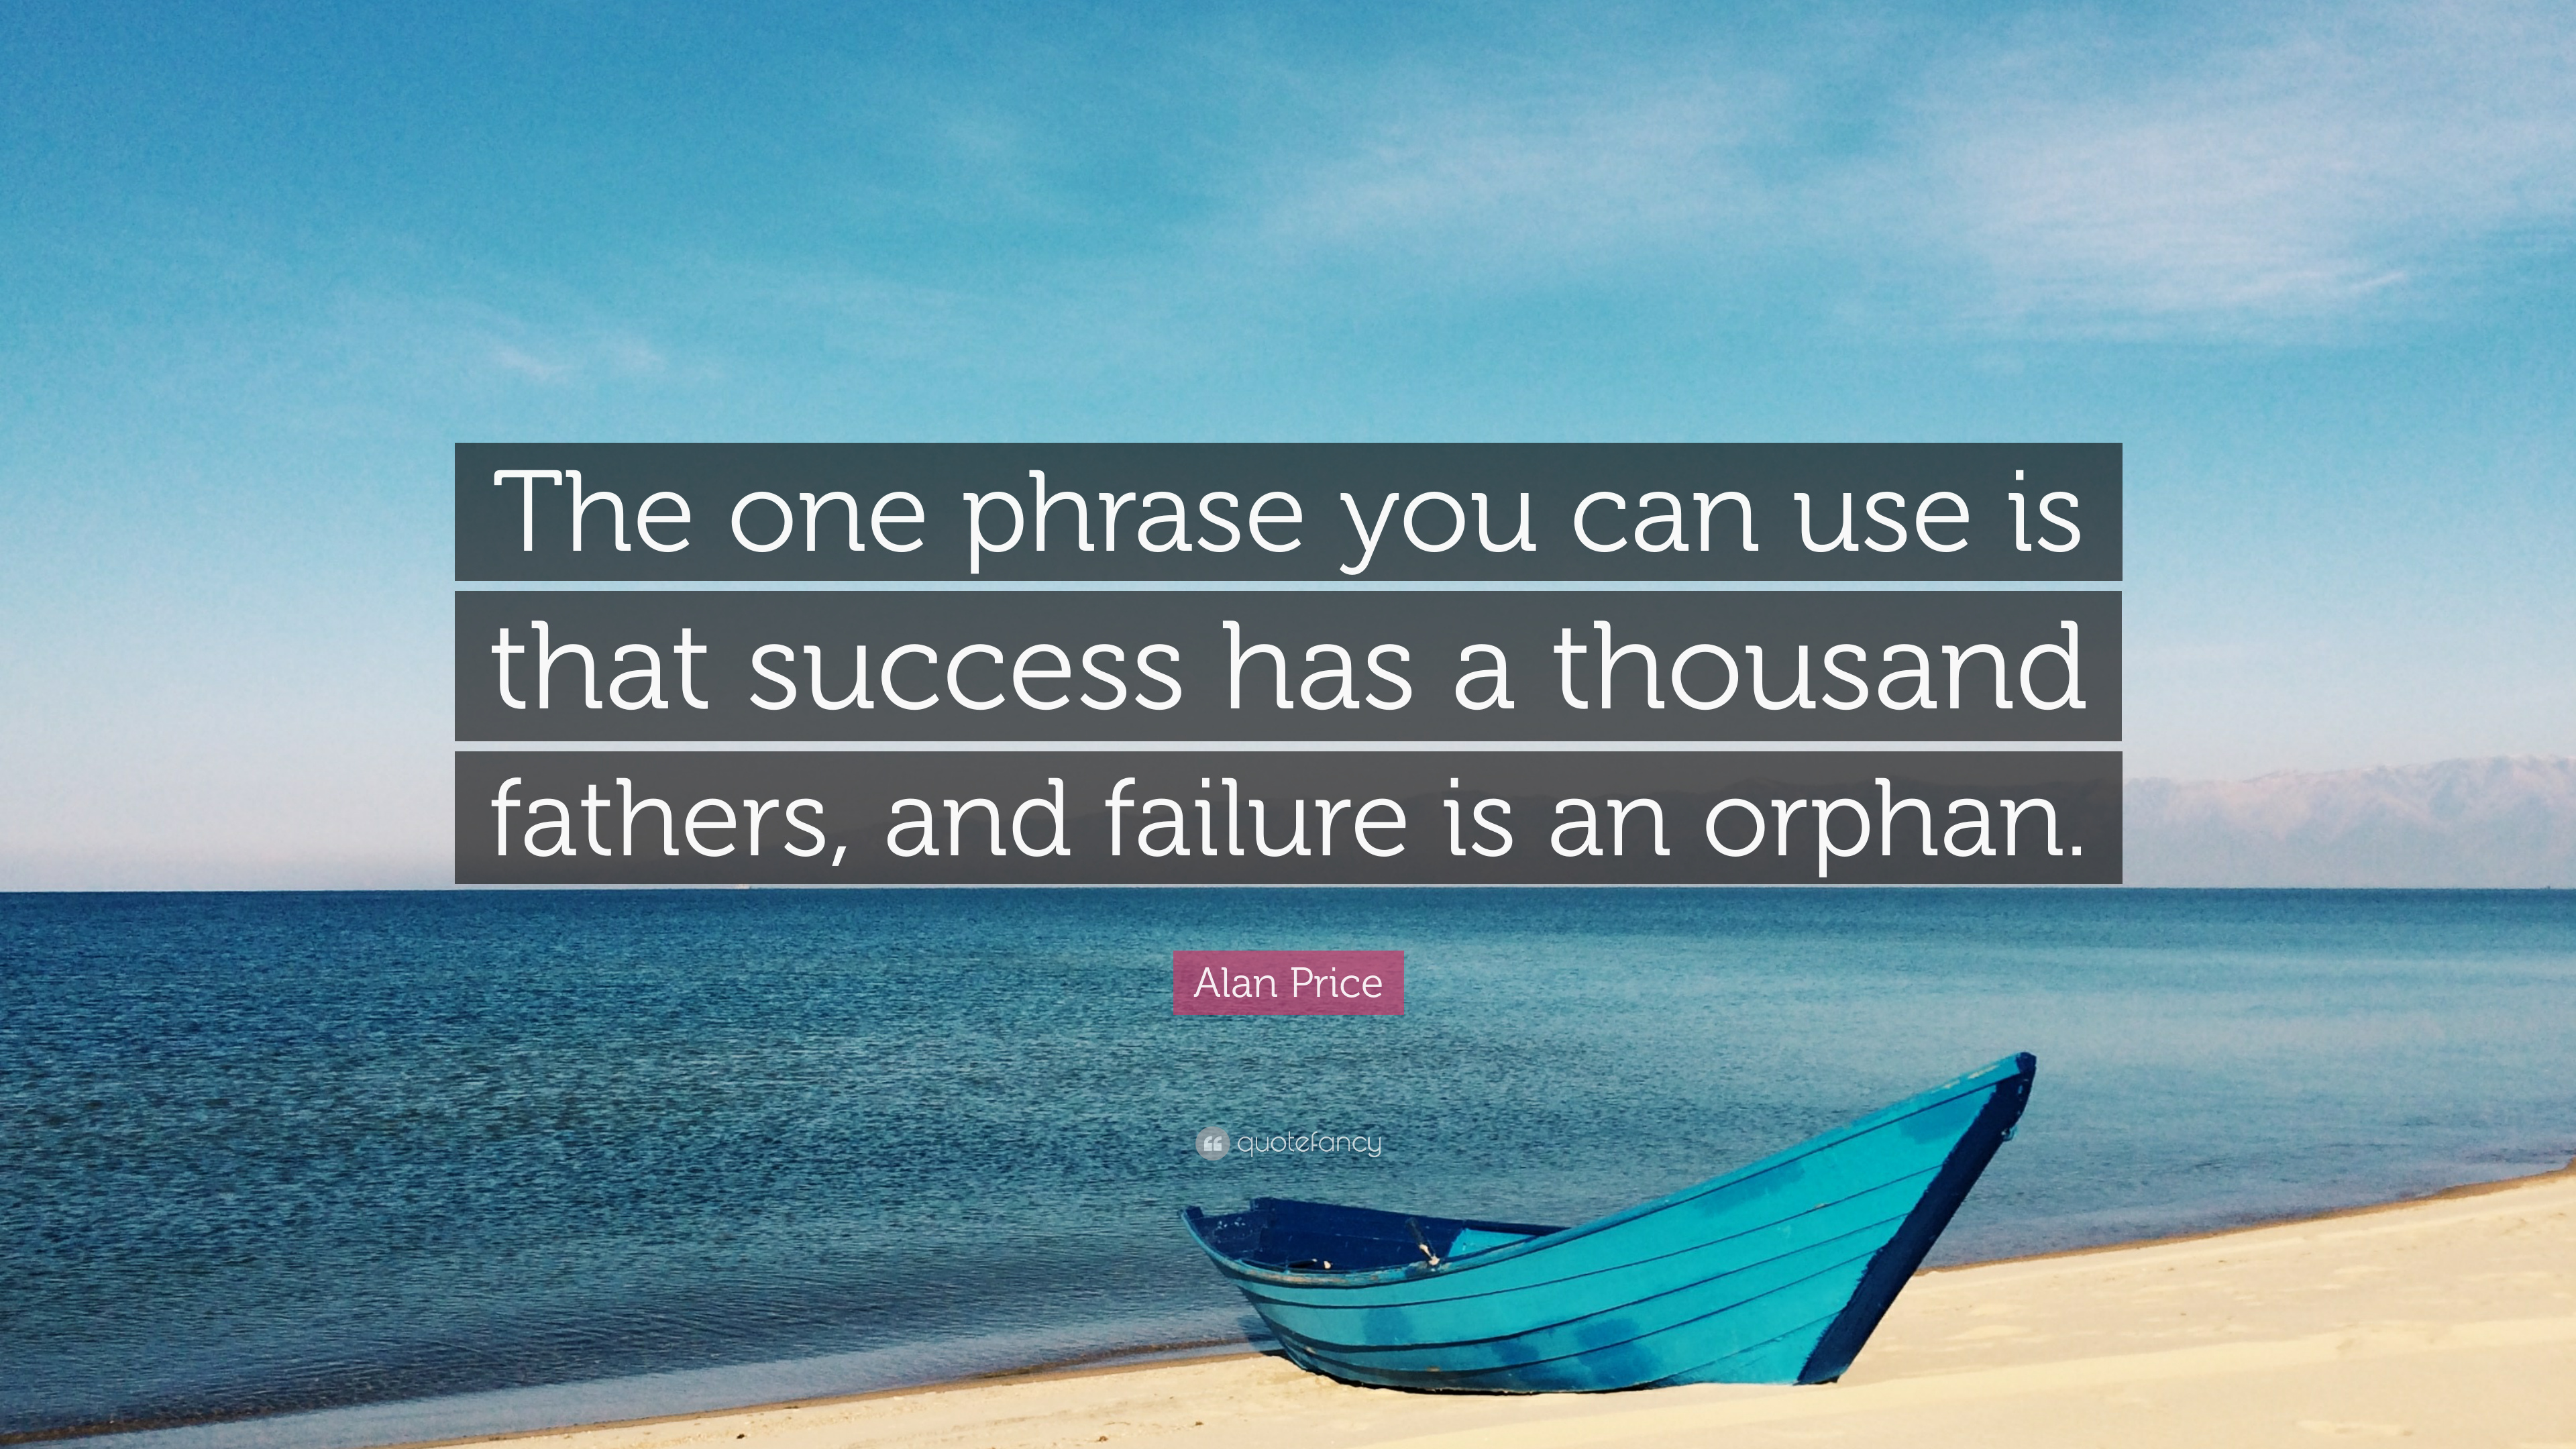 Alan price quote âthe one phrase you can use is that success has a thousand fathers